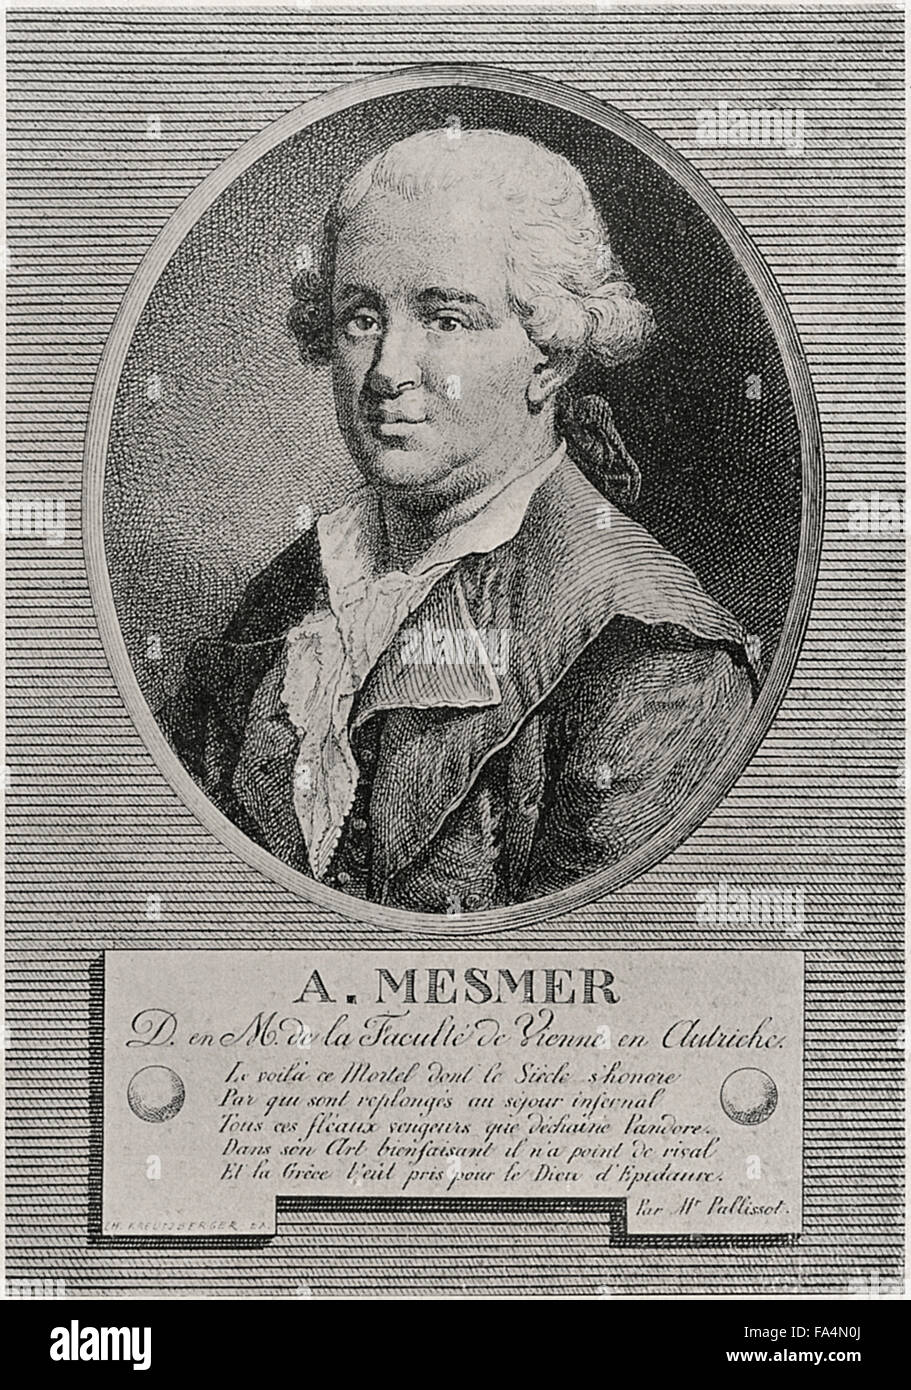 Franz Anton Mesmer (1734-1815), German Physician and Theorist on Animal Magnetism or Mesmerism, Book Illustration from “Cagliostro, The Splendour and Misery of A Master of Magic”, Chapman and Hall LTD, W.R.H. Trowbridge, 1910 Stock Photo